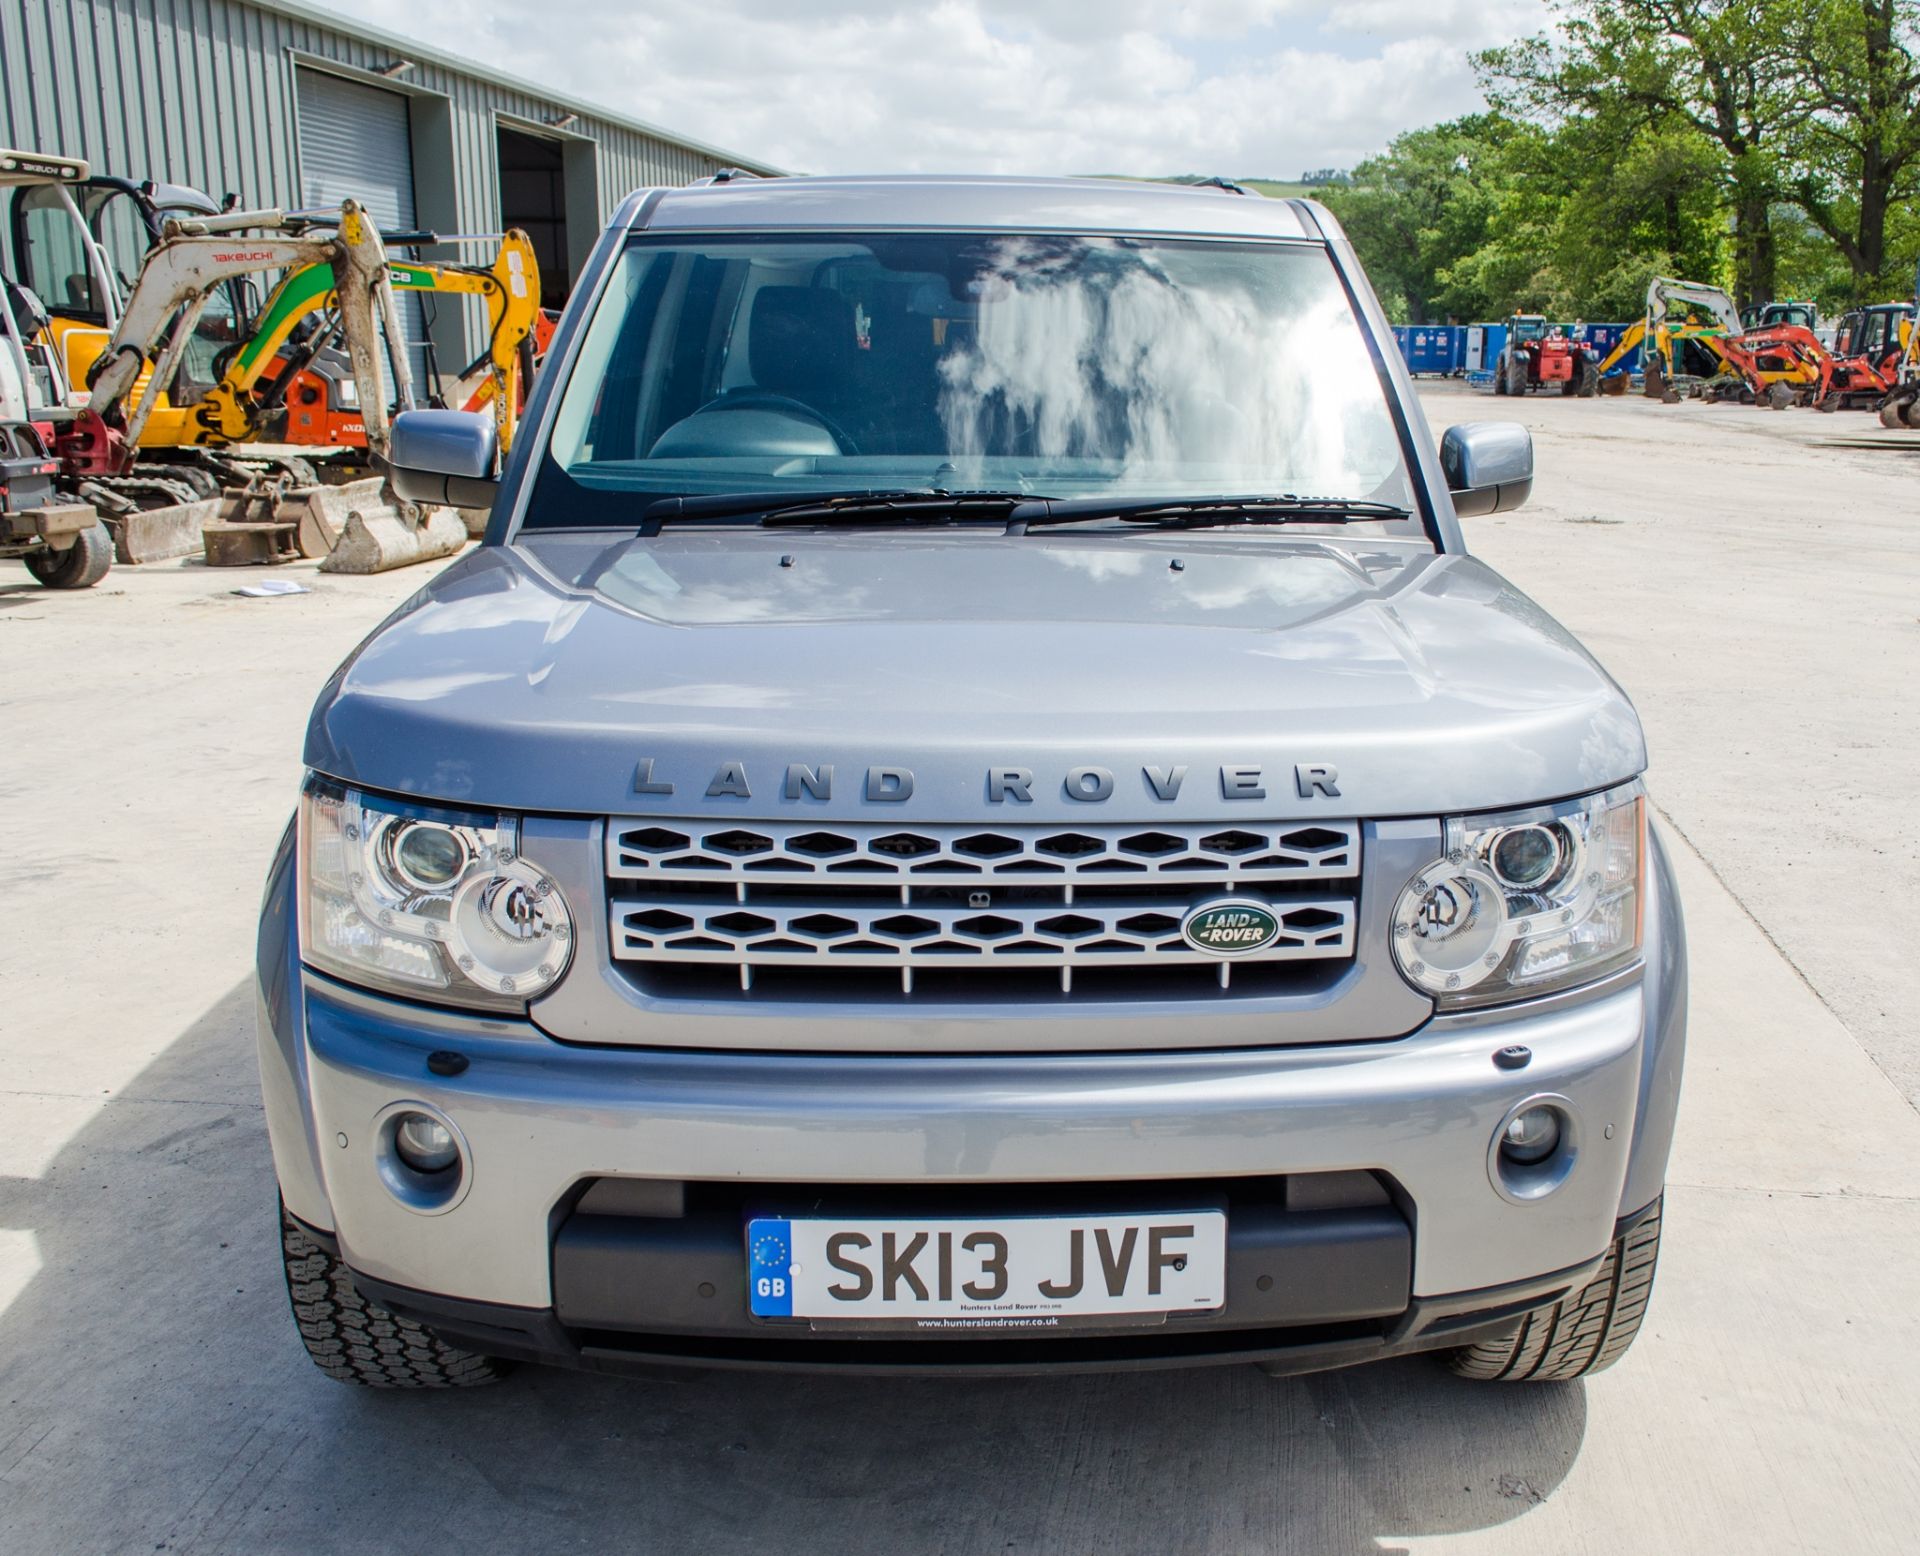 Land Rover Discovery 4 3.0 SDV6 255 XS 5 door SUV Registration Number: SK13 JVF Date of - Image 5 of 32